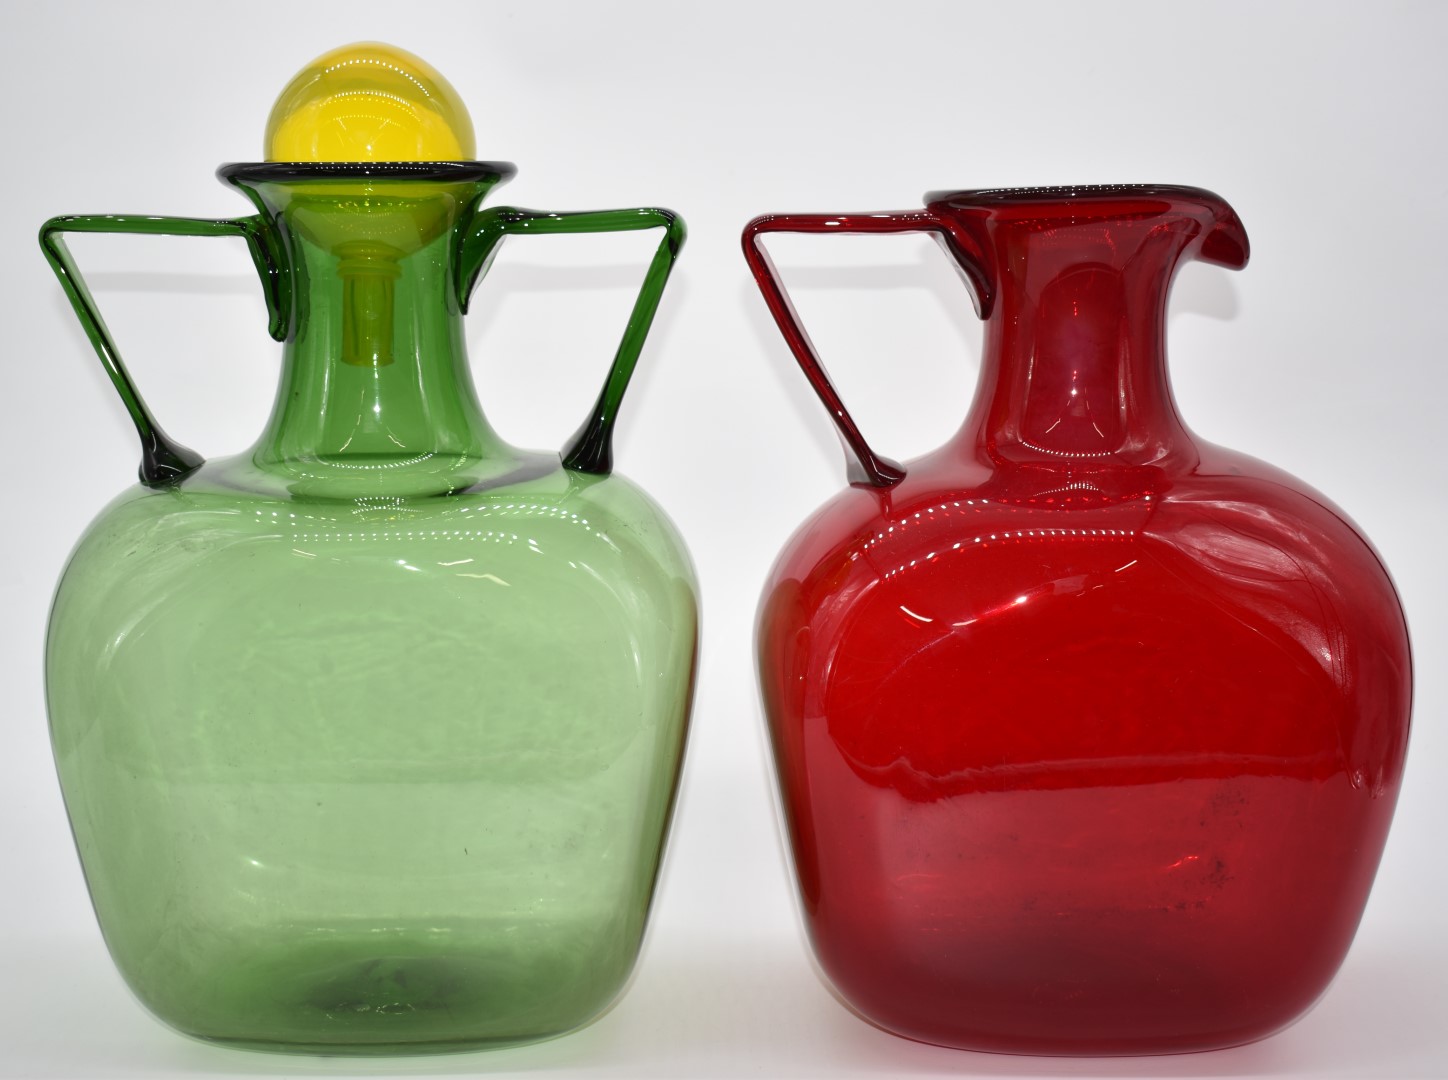 Two Polspotten jugs, one green with twin handles and yellow stopper the other red, tallest 43cm - Image 2 of 2